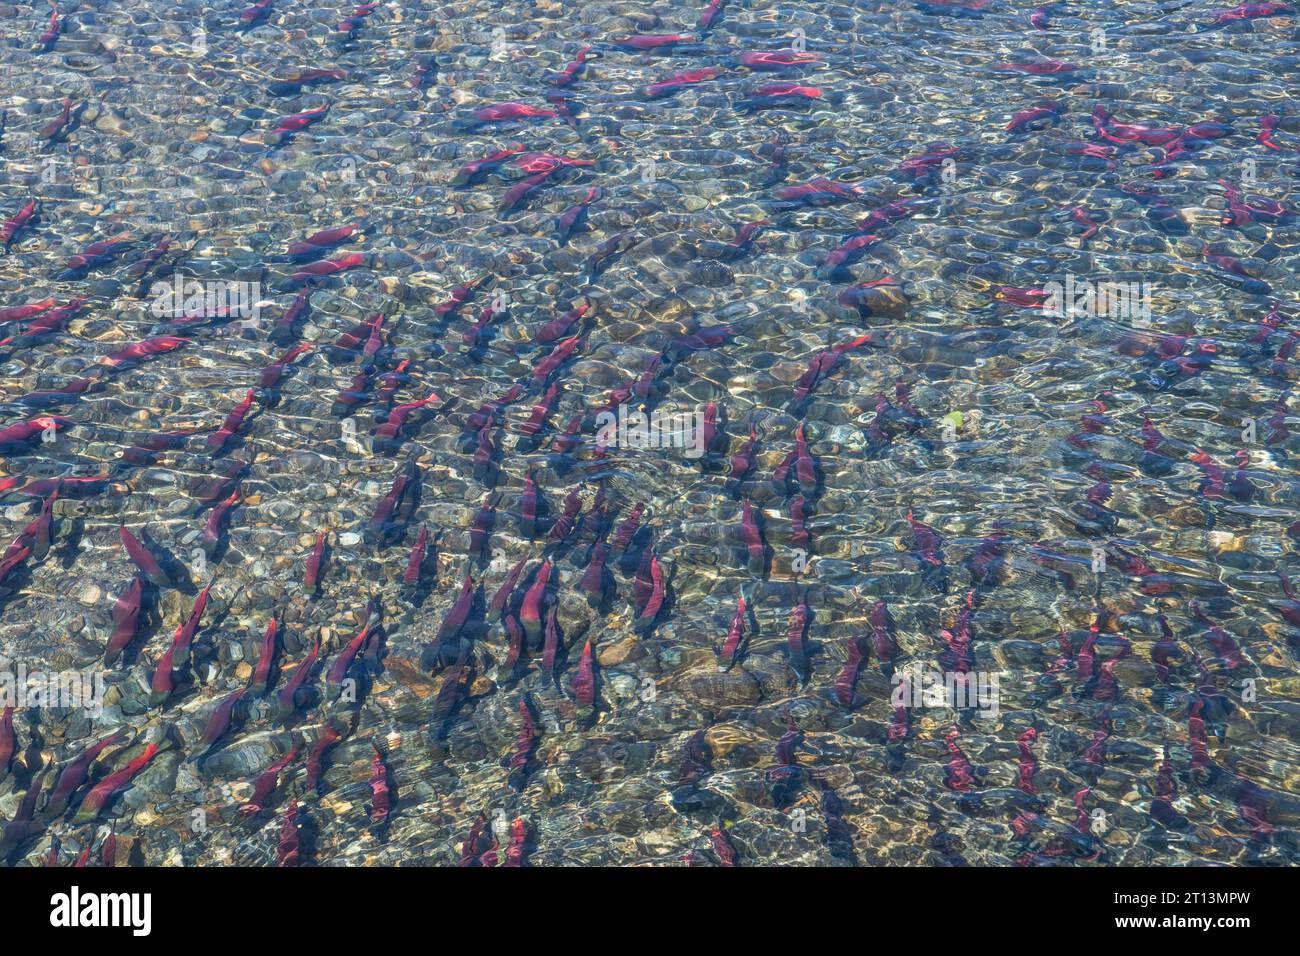 Migrating kokanee salmon (Oncorhynchus nerka) migrating and spawning seen from above. Stock Photo